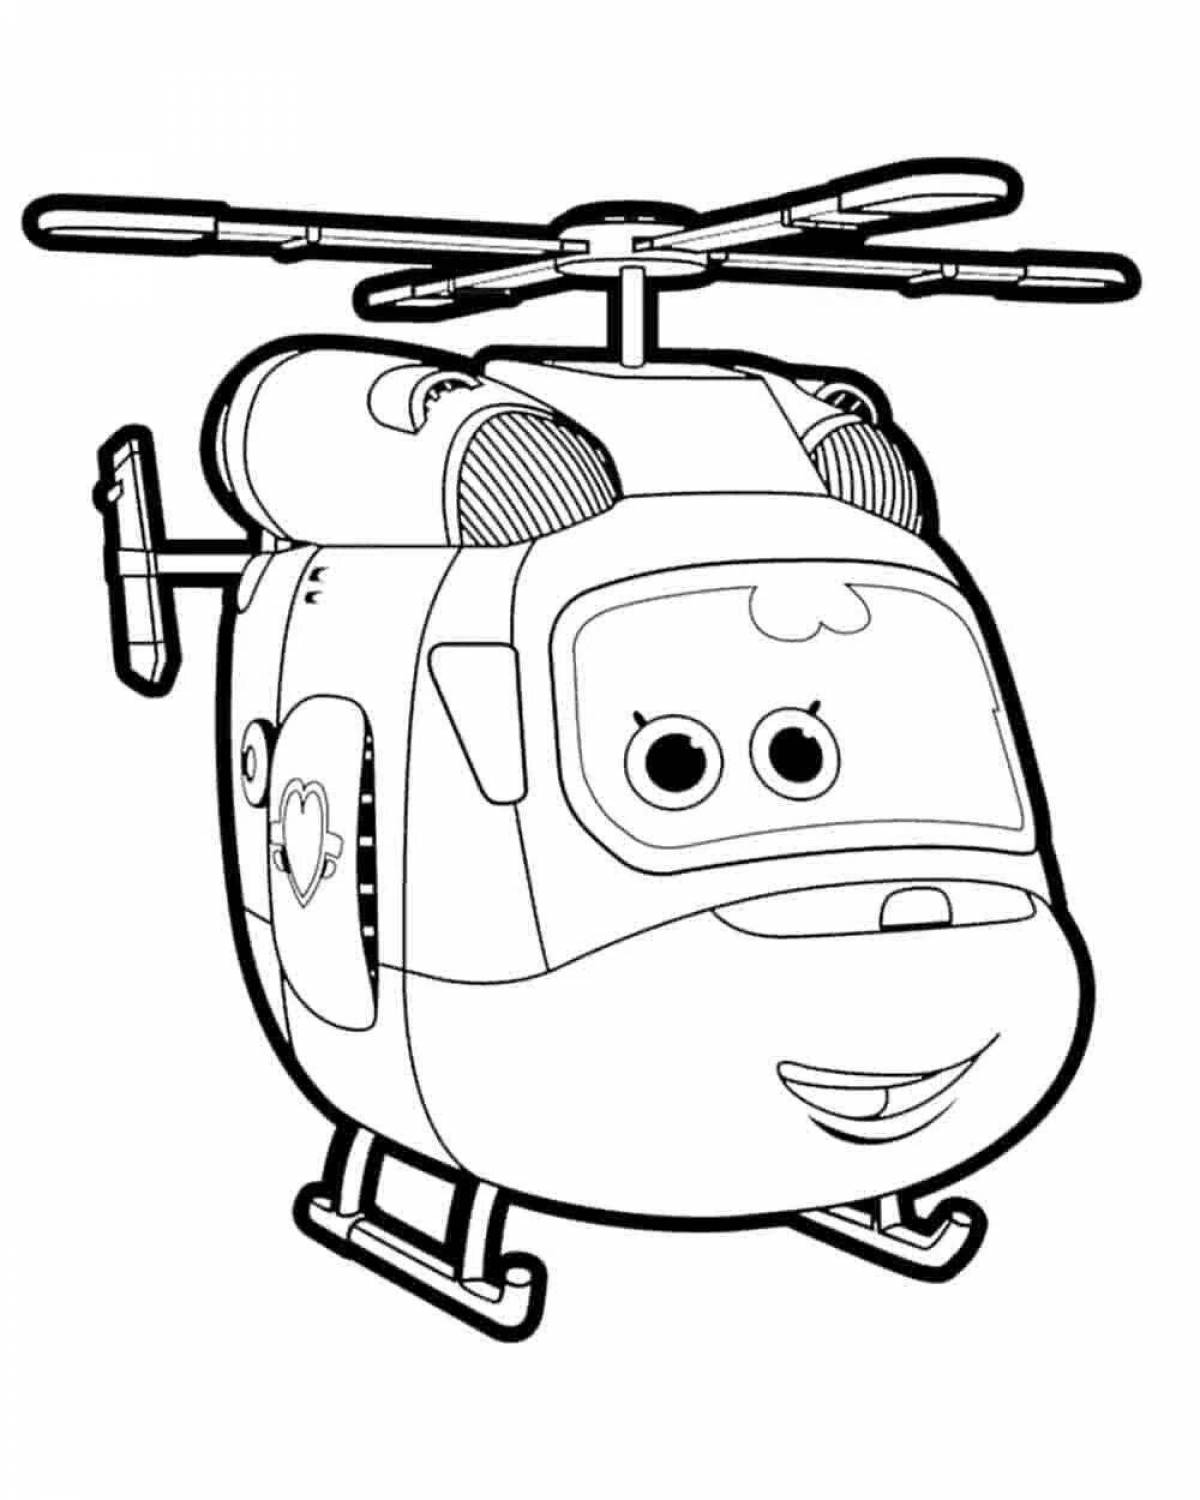 Sweet auto patrol coloring page